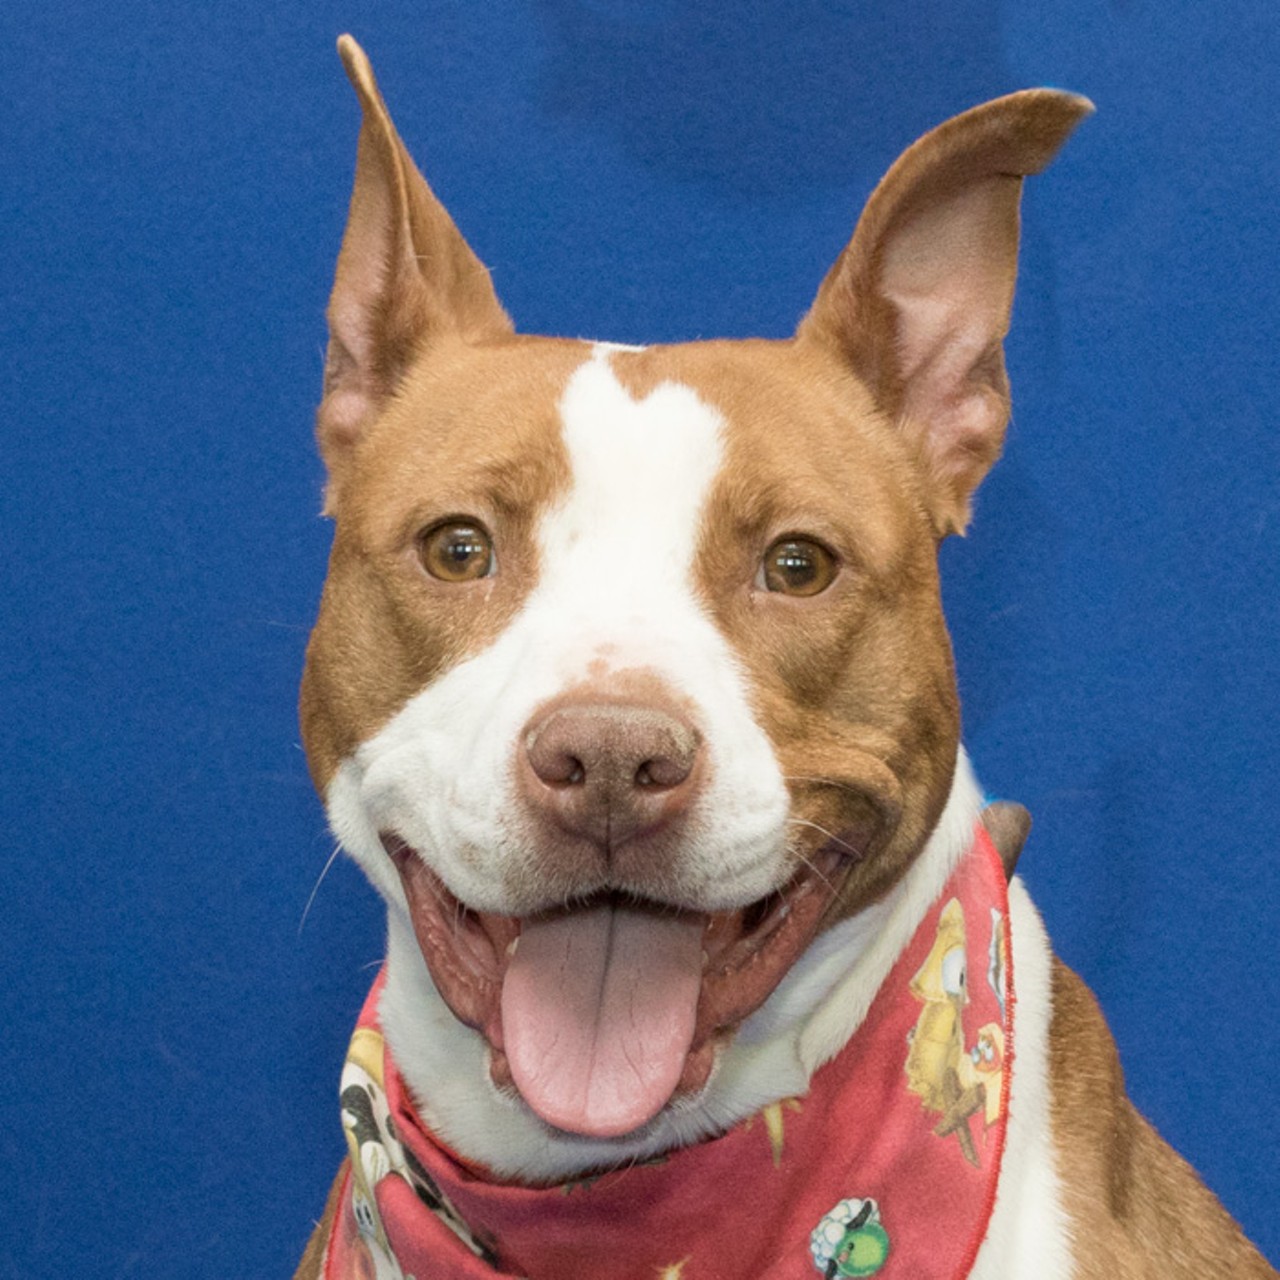 NAME: Mari
GENDER: Female
BREED: Pit Bull Terrier
AGE: 1 year, 7 months
WEIGHT: 43 pounds
SPECIAL CONSIDERATIONS: This dog is free thanks to a generous supporter!
REASON I CAME TO MHS: Owner surrender
LOCATION: Rochester Hills Center for Animal Care
ID NUMBER: 863761